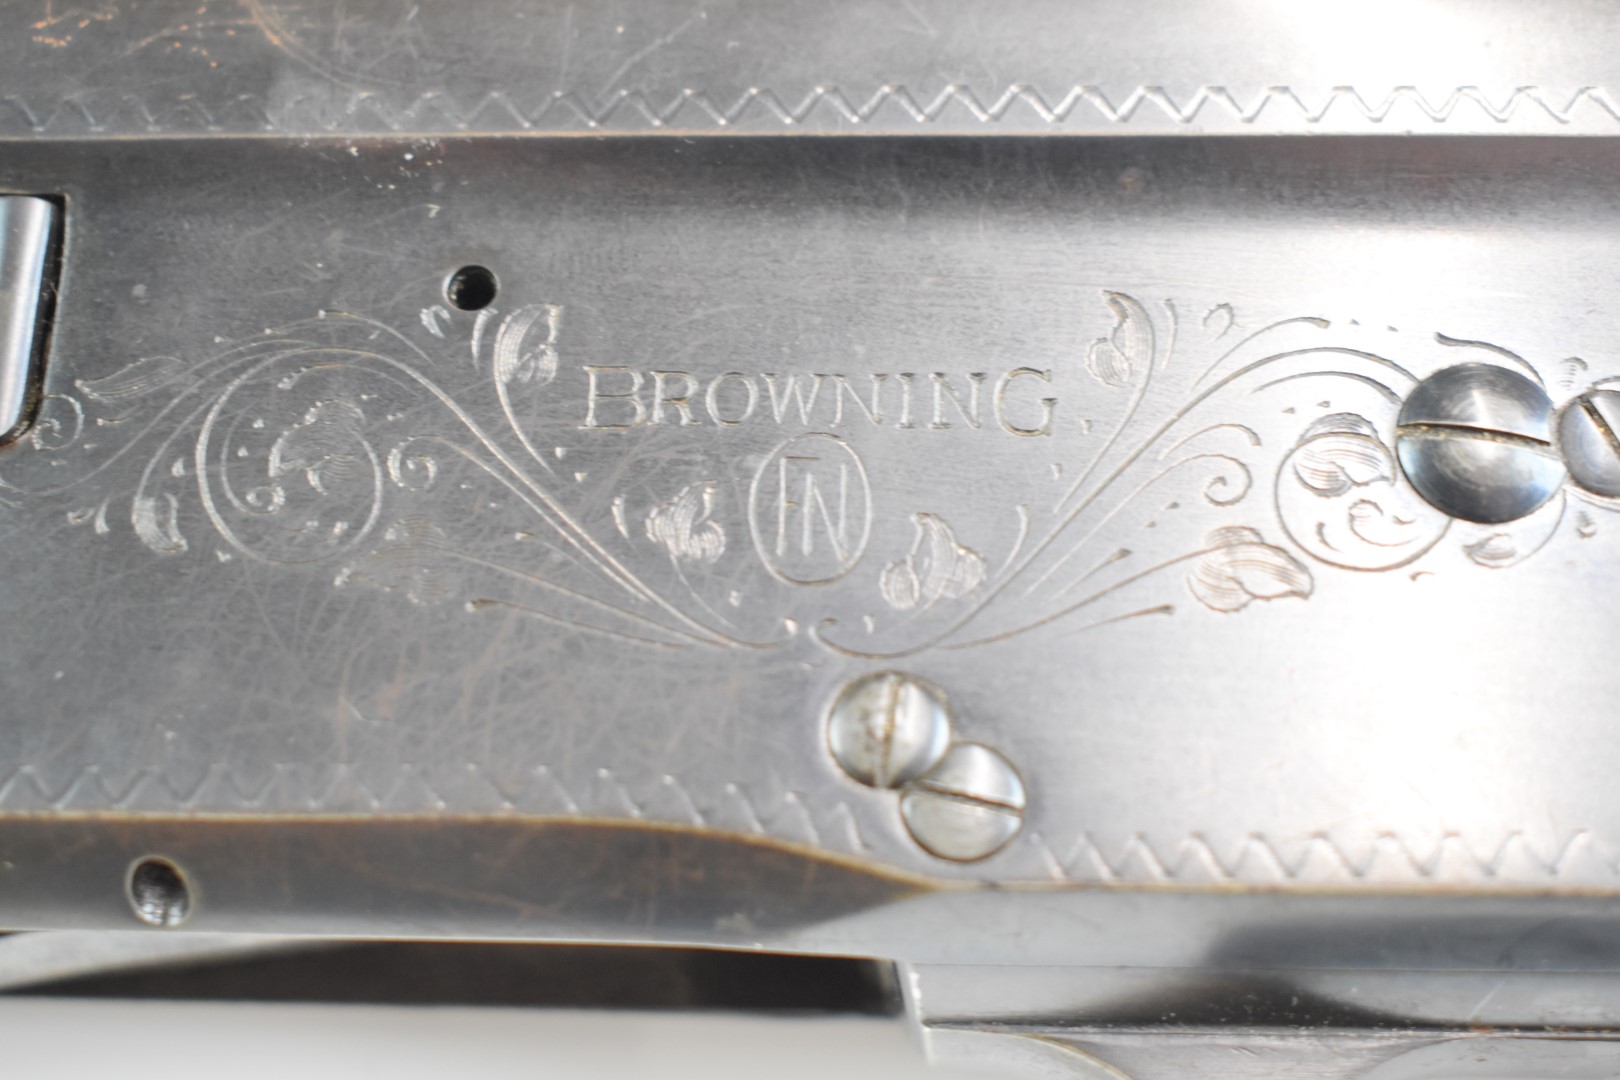 Browning 12 bore 3-shot semi-automatic shotgun with named and engraved locks, semi-pistol grip and - Image 21 of 22